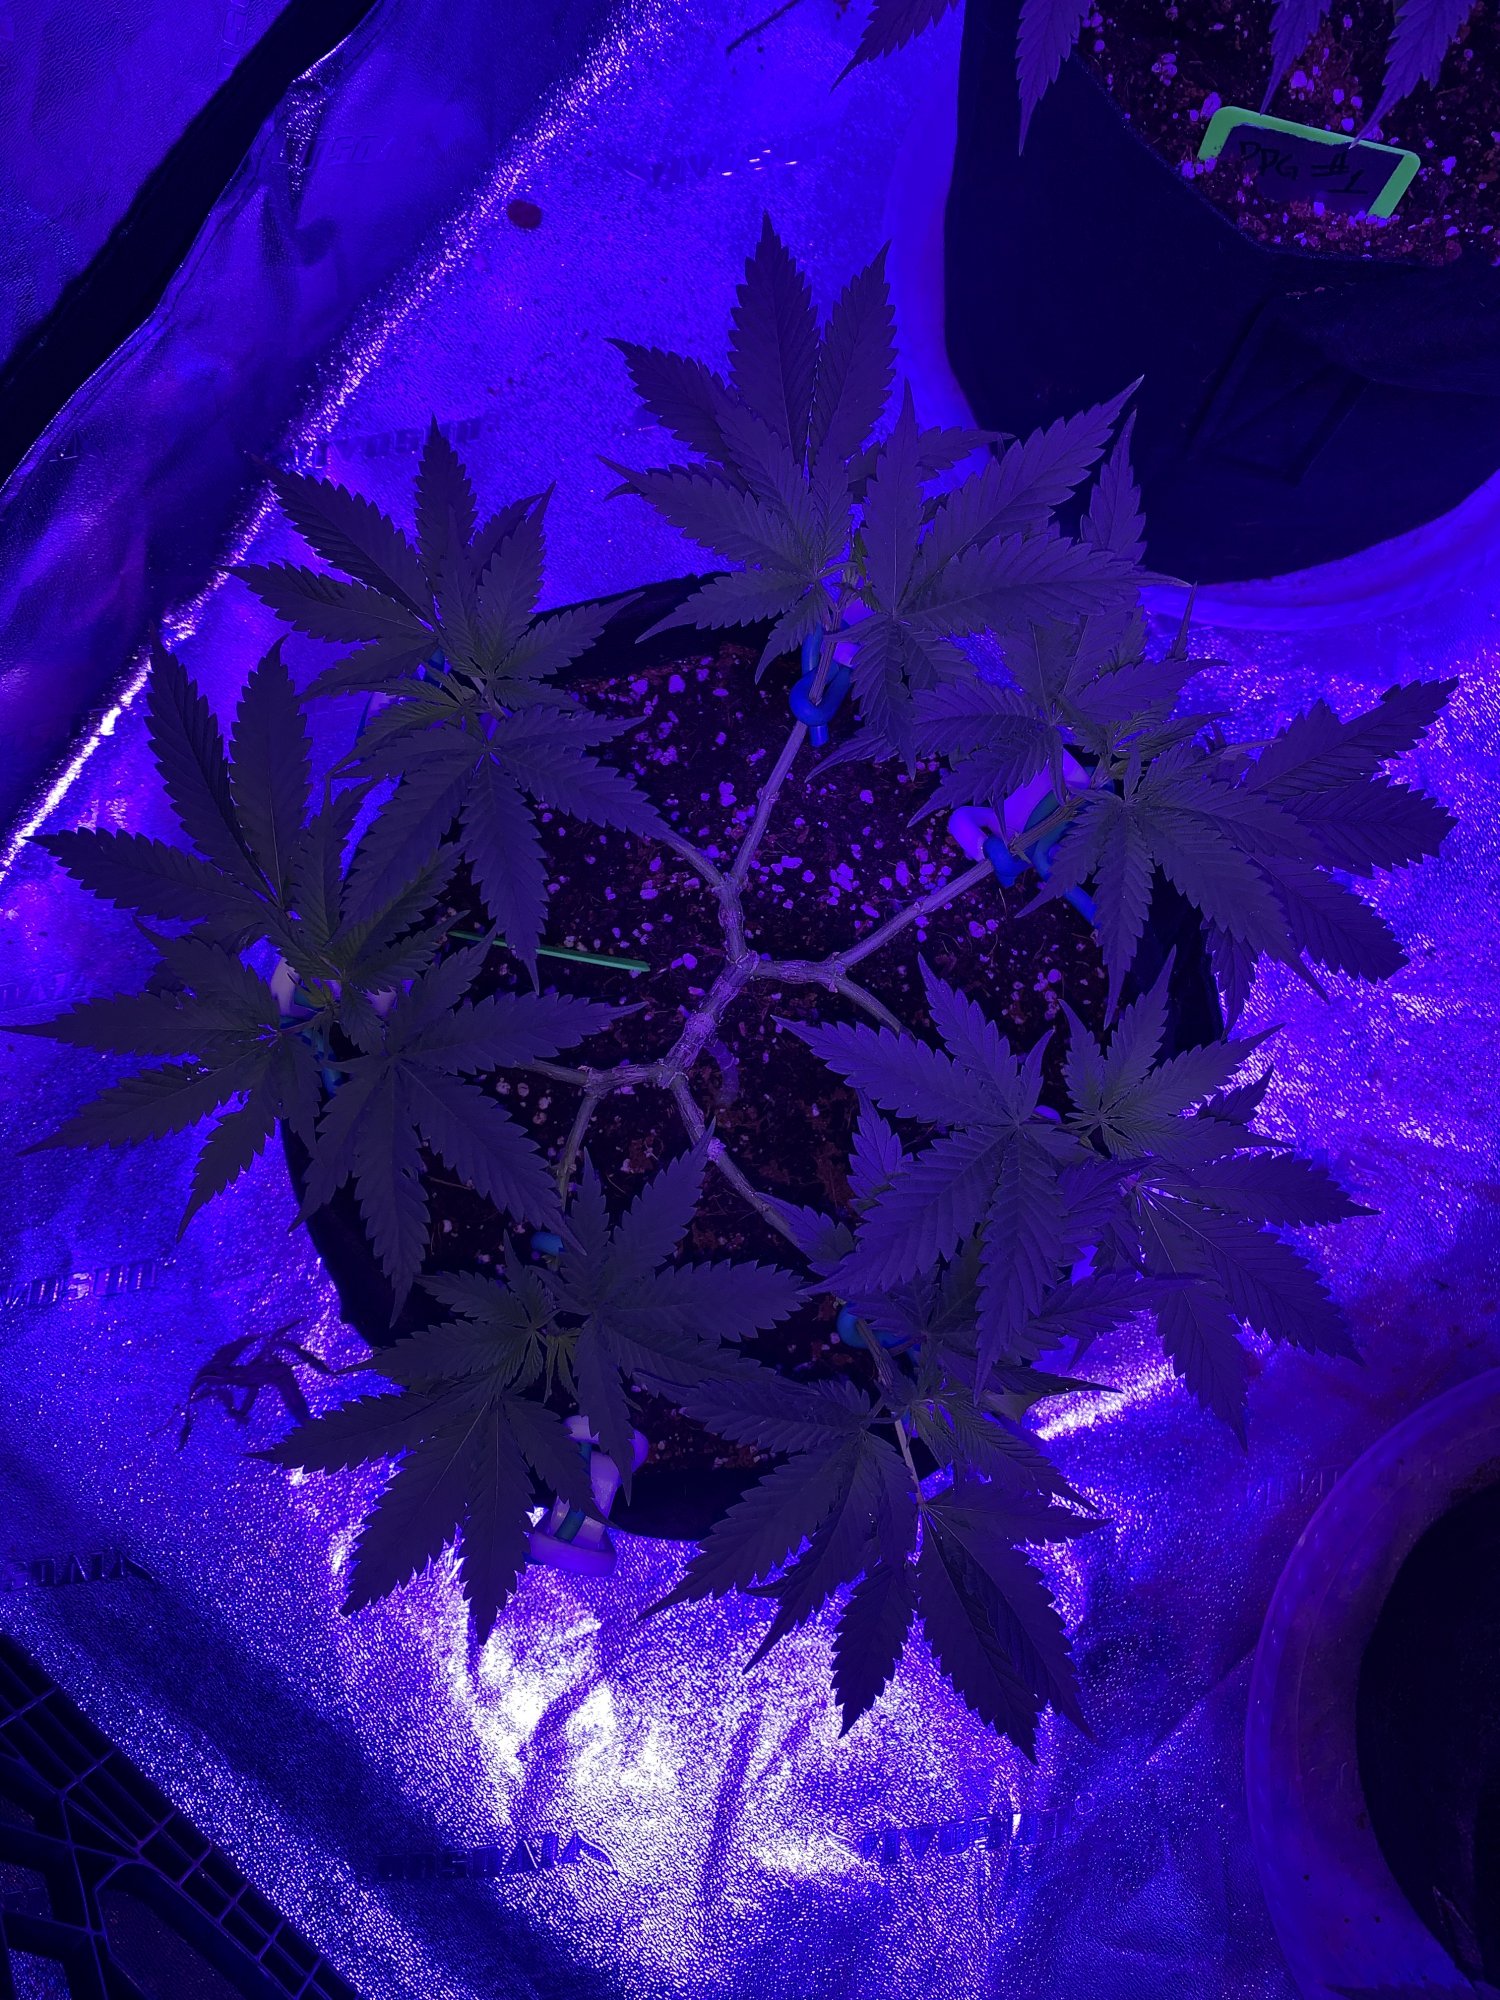 Are these too early to flip into flower 4